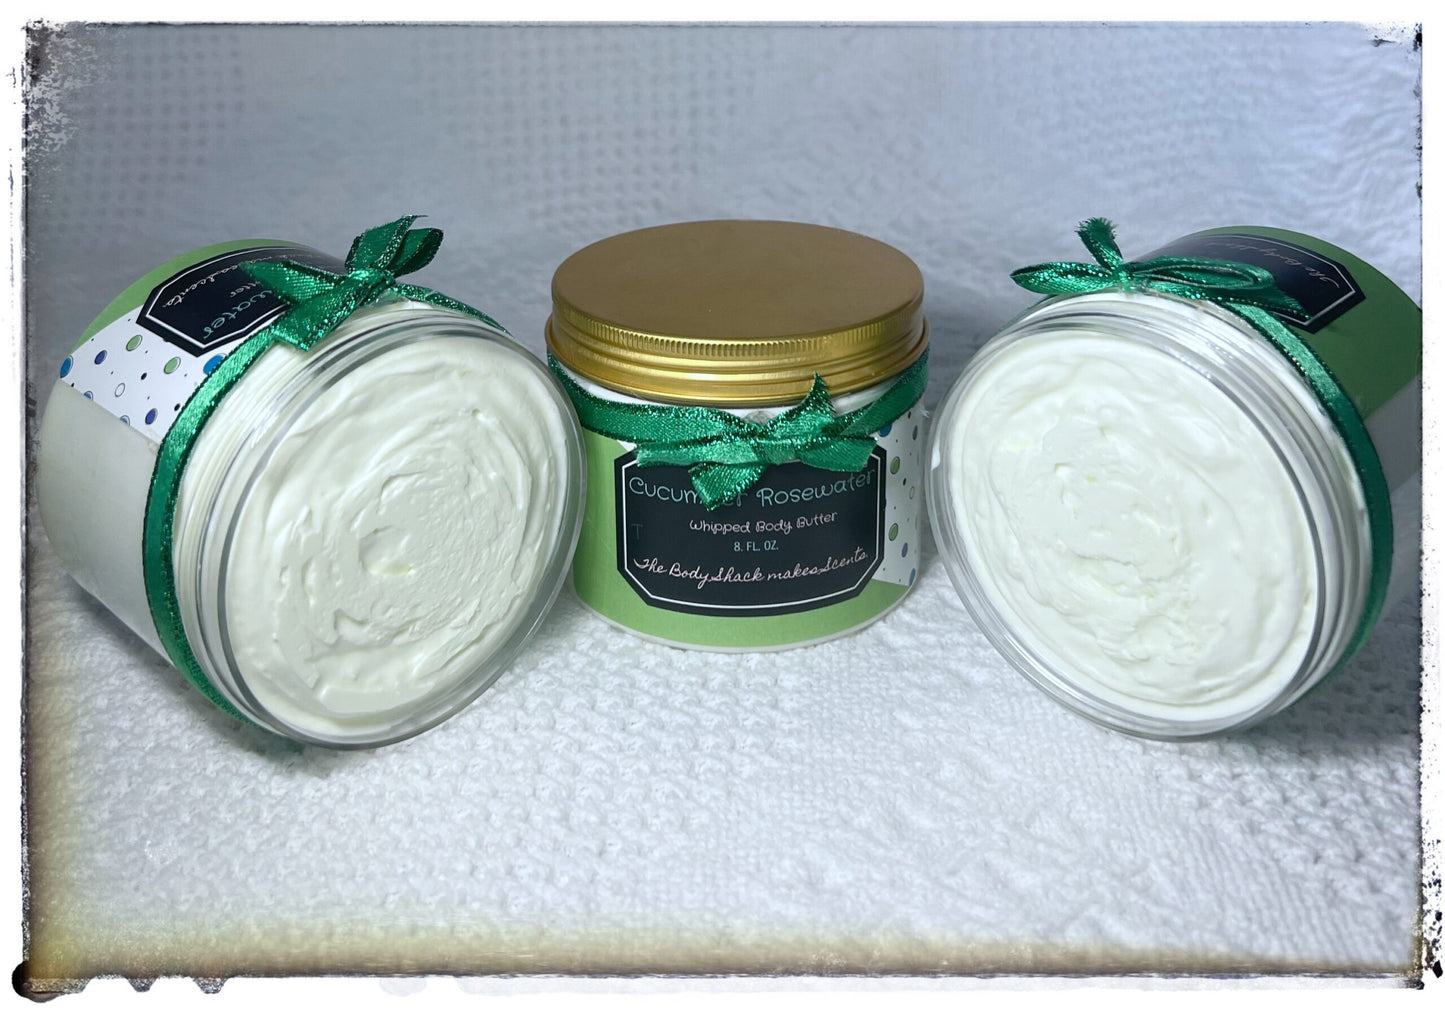 Cucumber Rosewater Whipped Body Butter